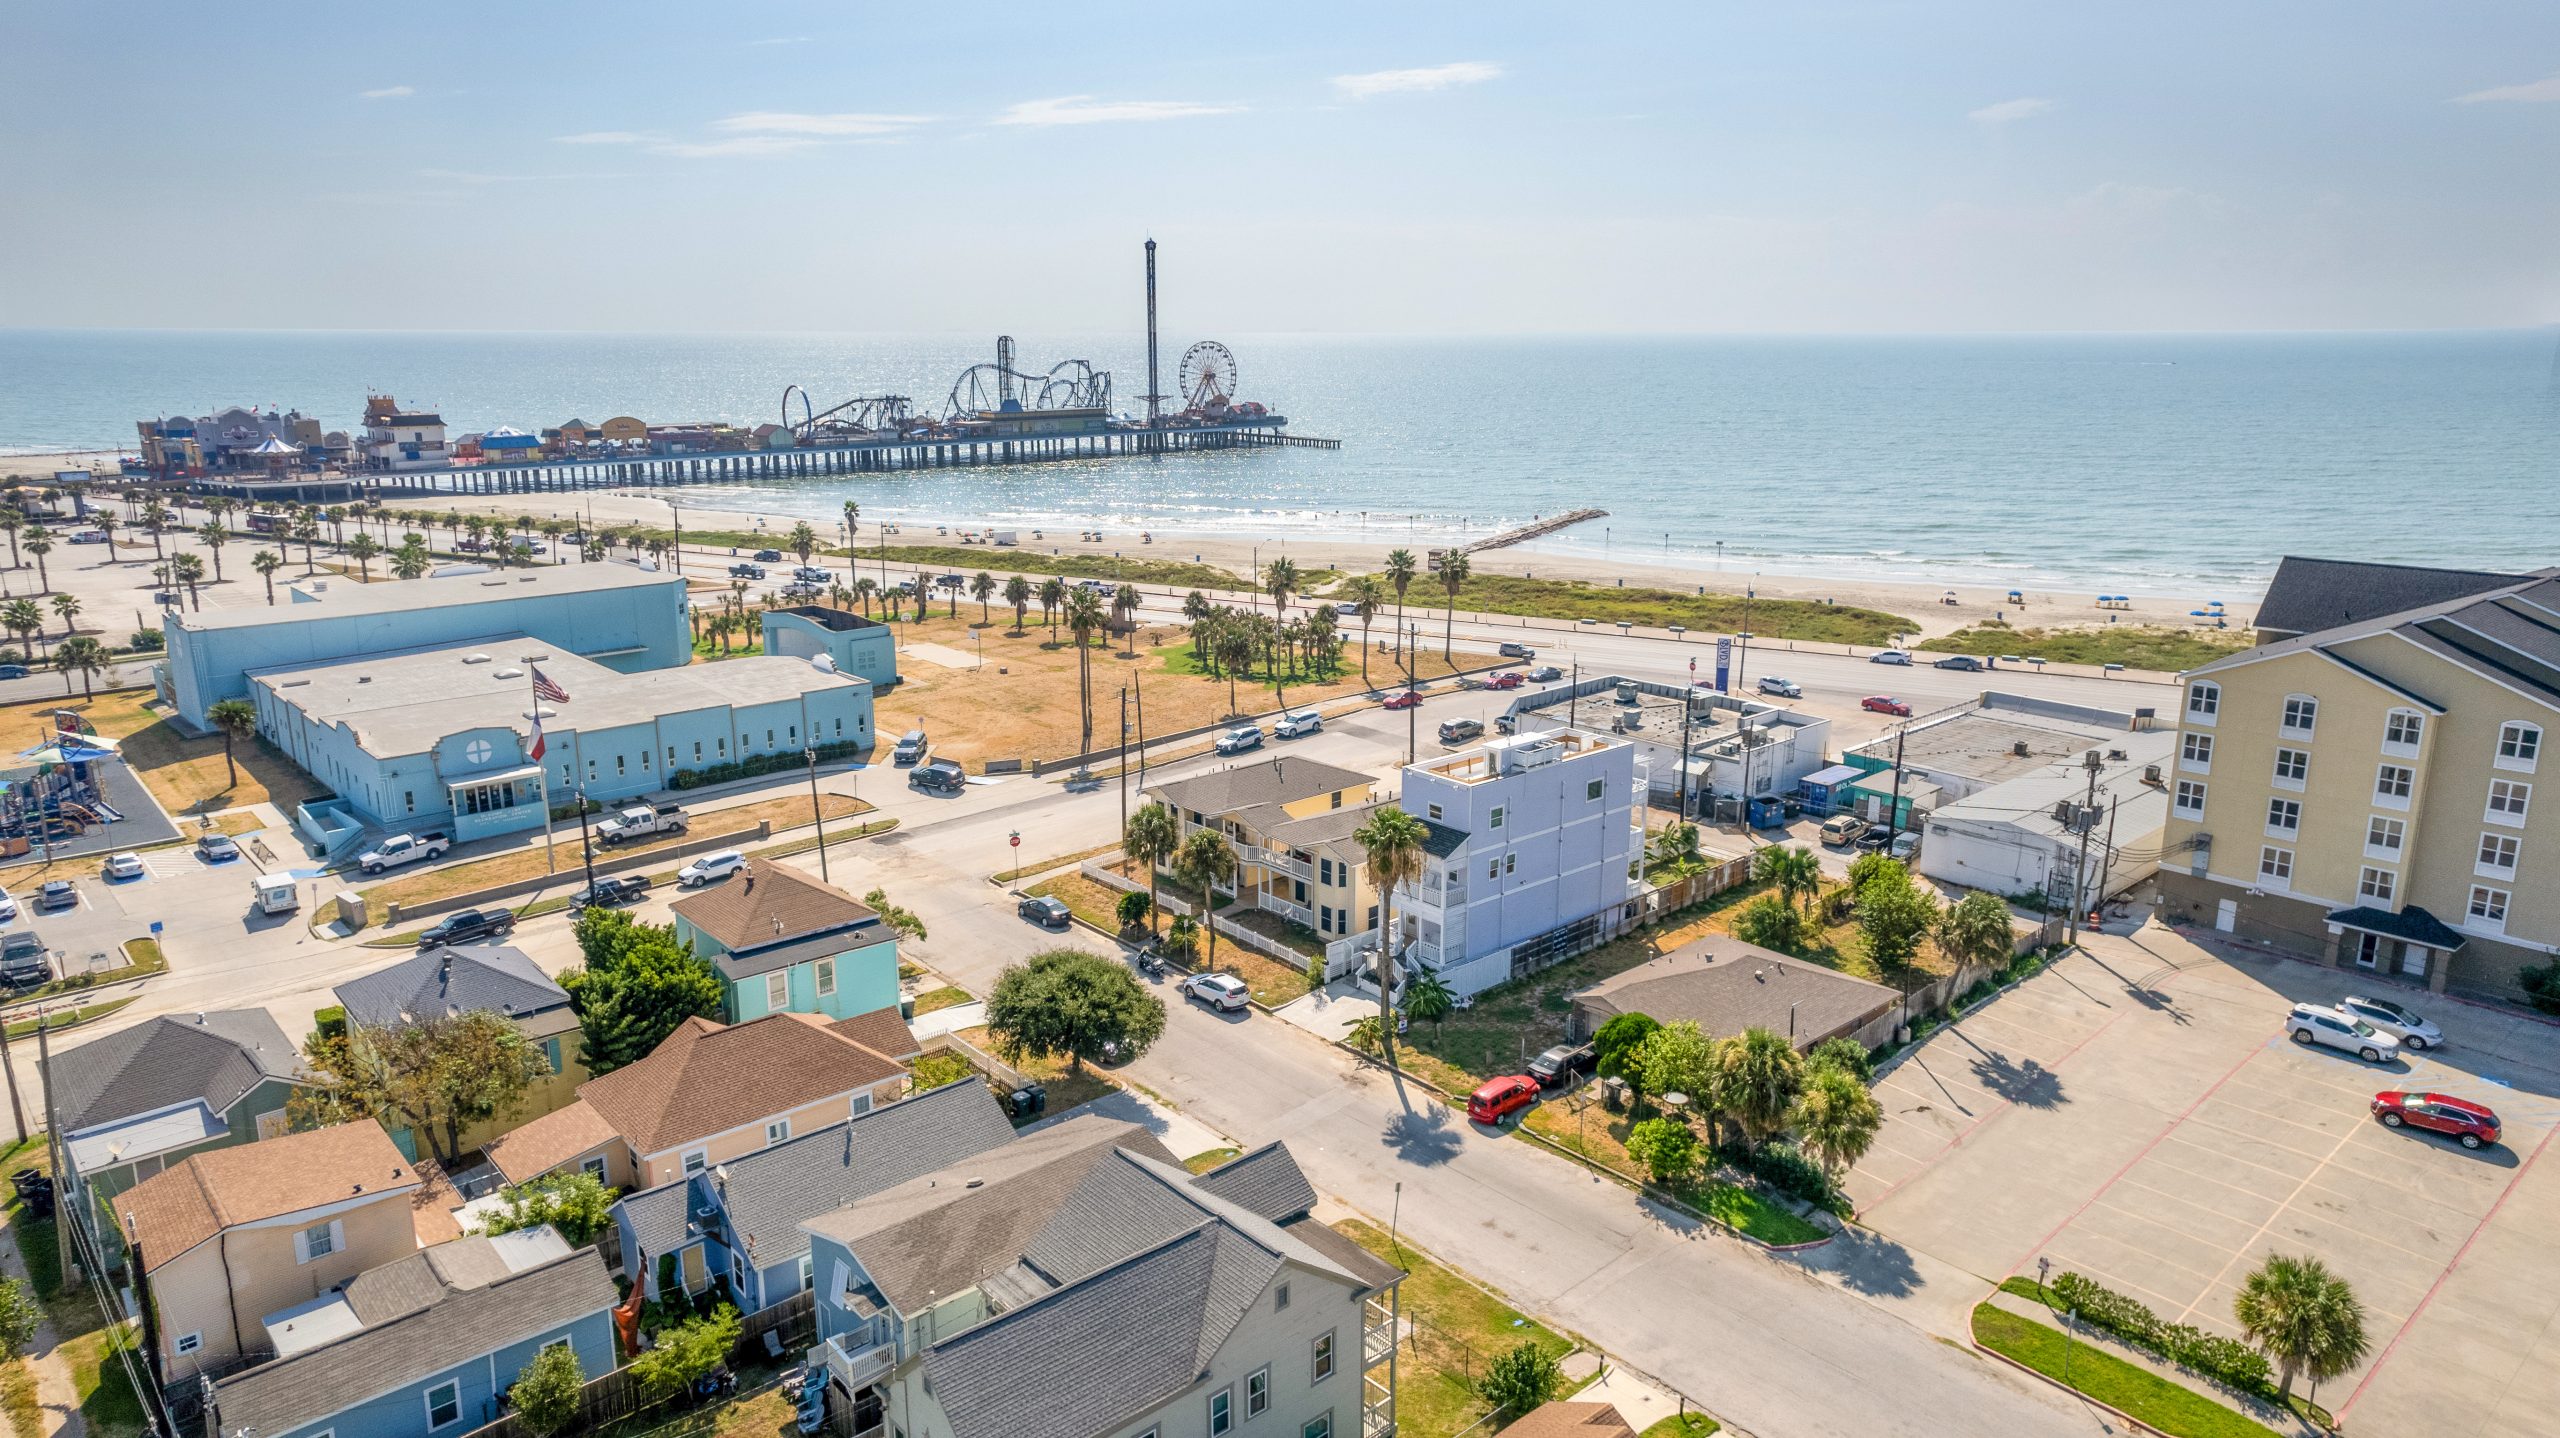 Square Foot's Best Real Estate Photos - aerial view of a property with nearby Galveston beach and pier with amusement rides